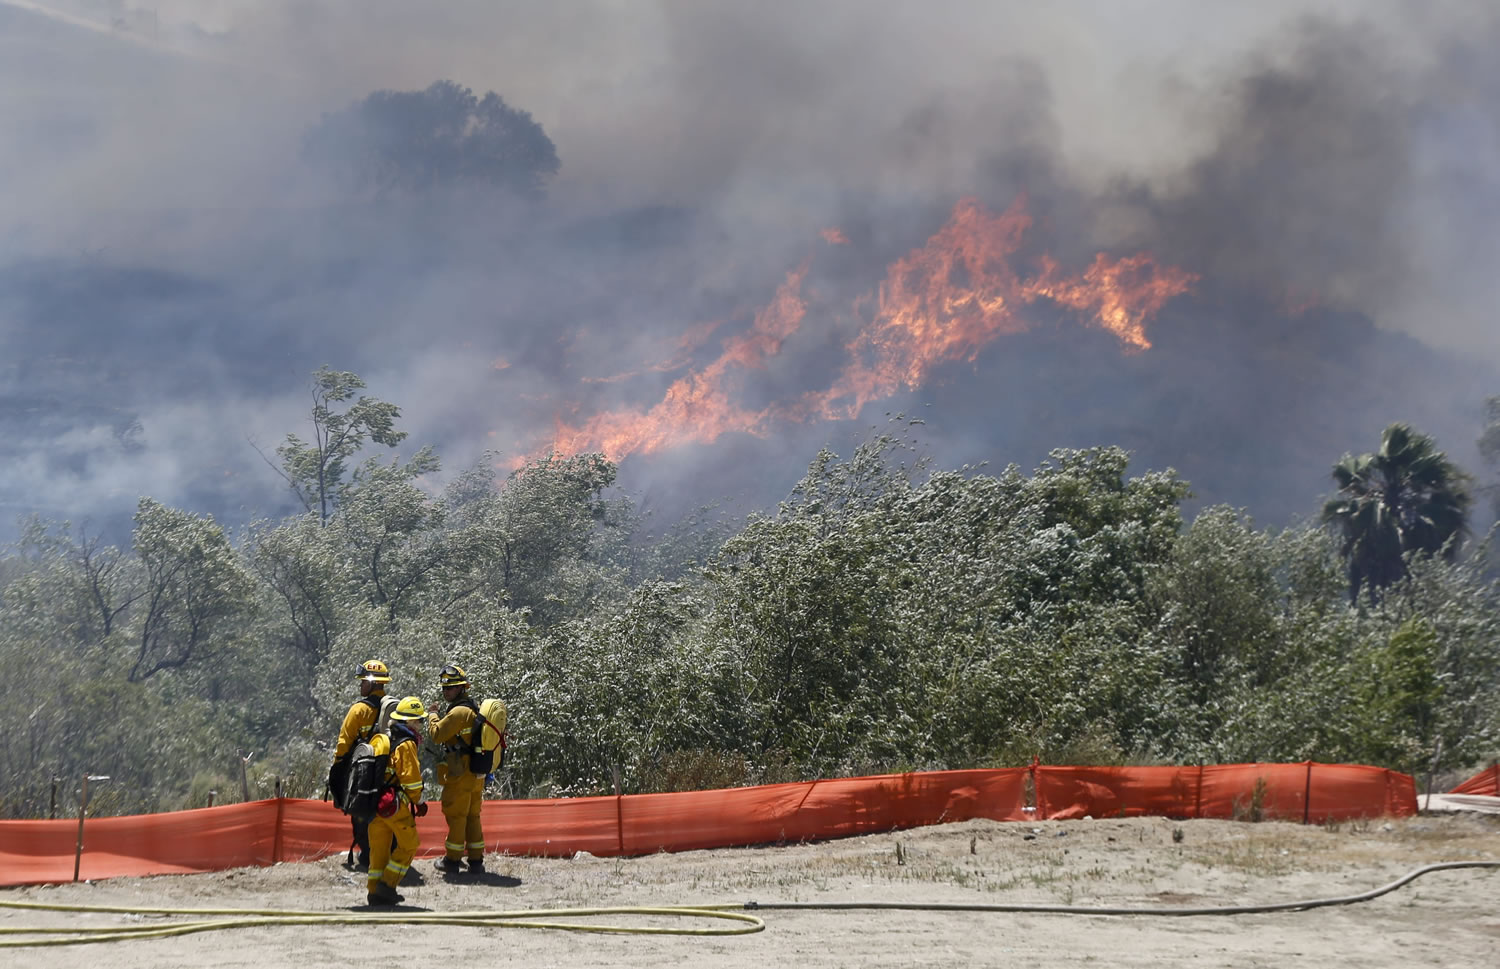 Flames grow as a wild fire burns out-of-control in the north county area of San Diego on Tuesday.